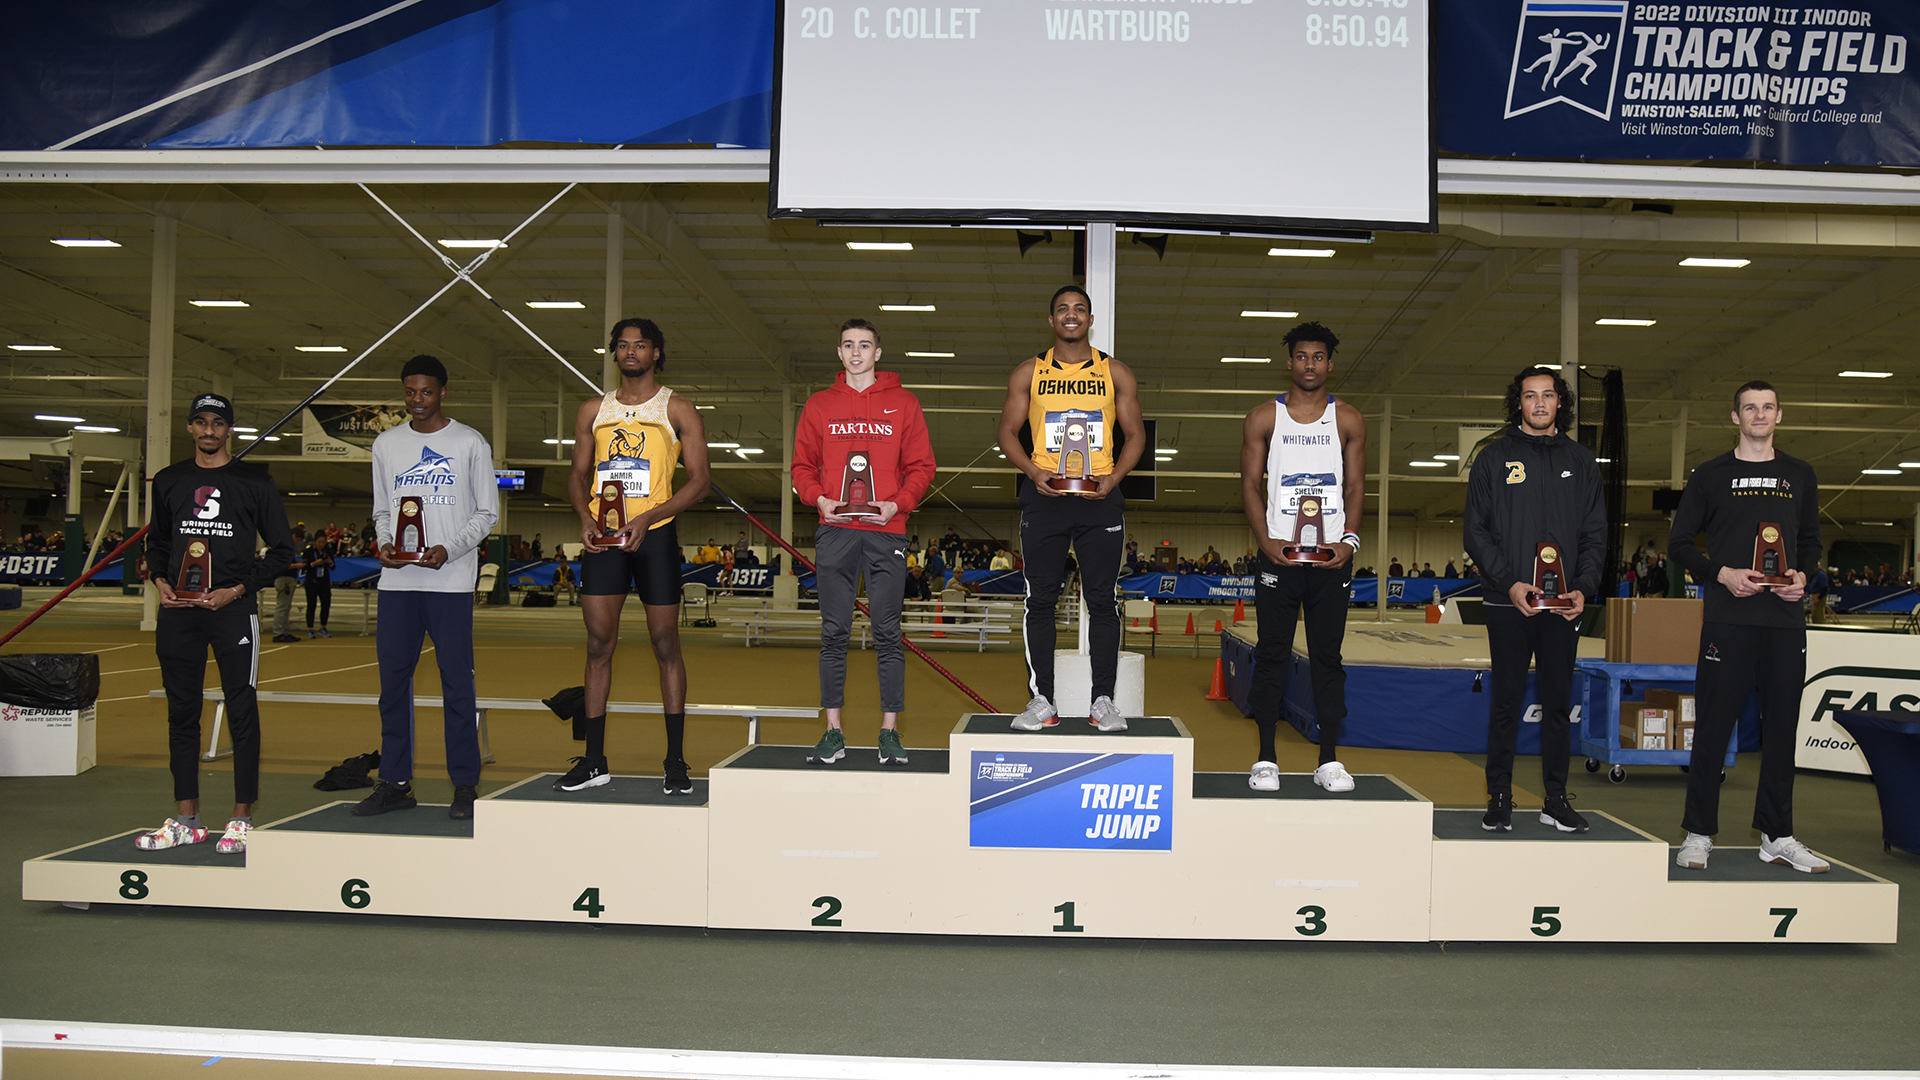 Jonathan Wilburn became the 10th UW-Oshkosh athlete to win a NCAA Division III individual indoor title.